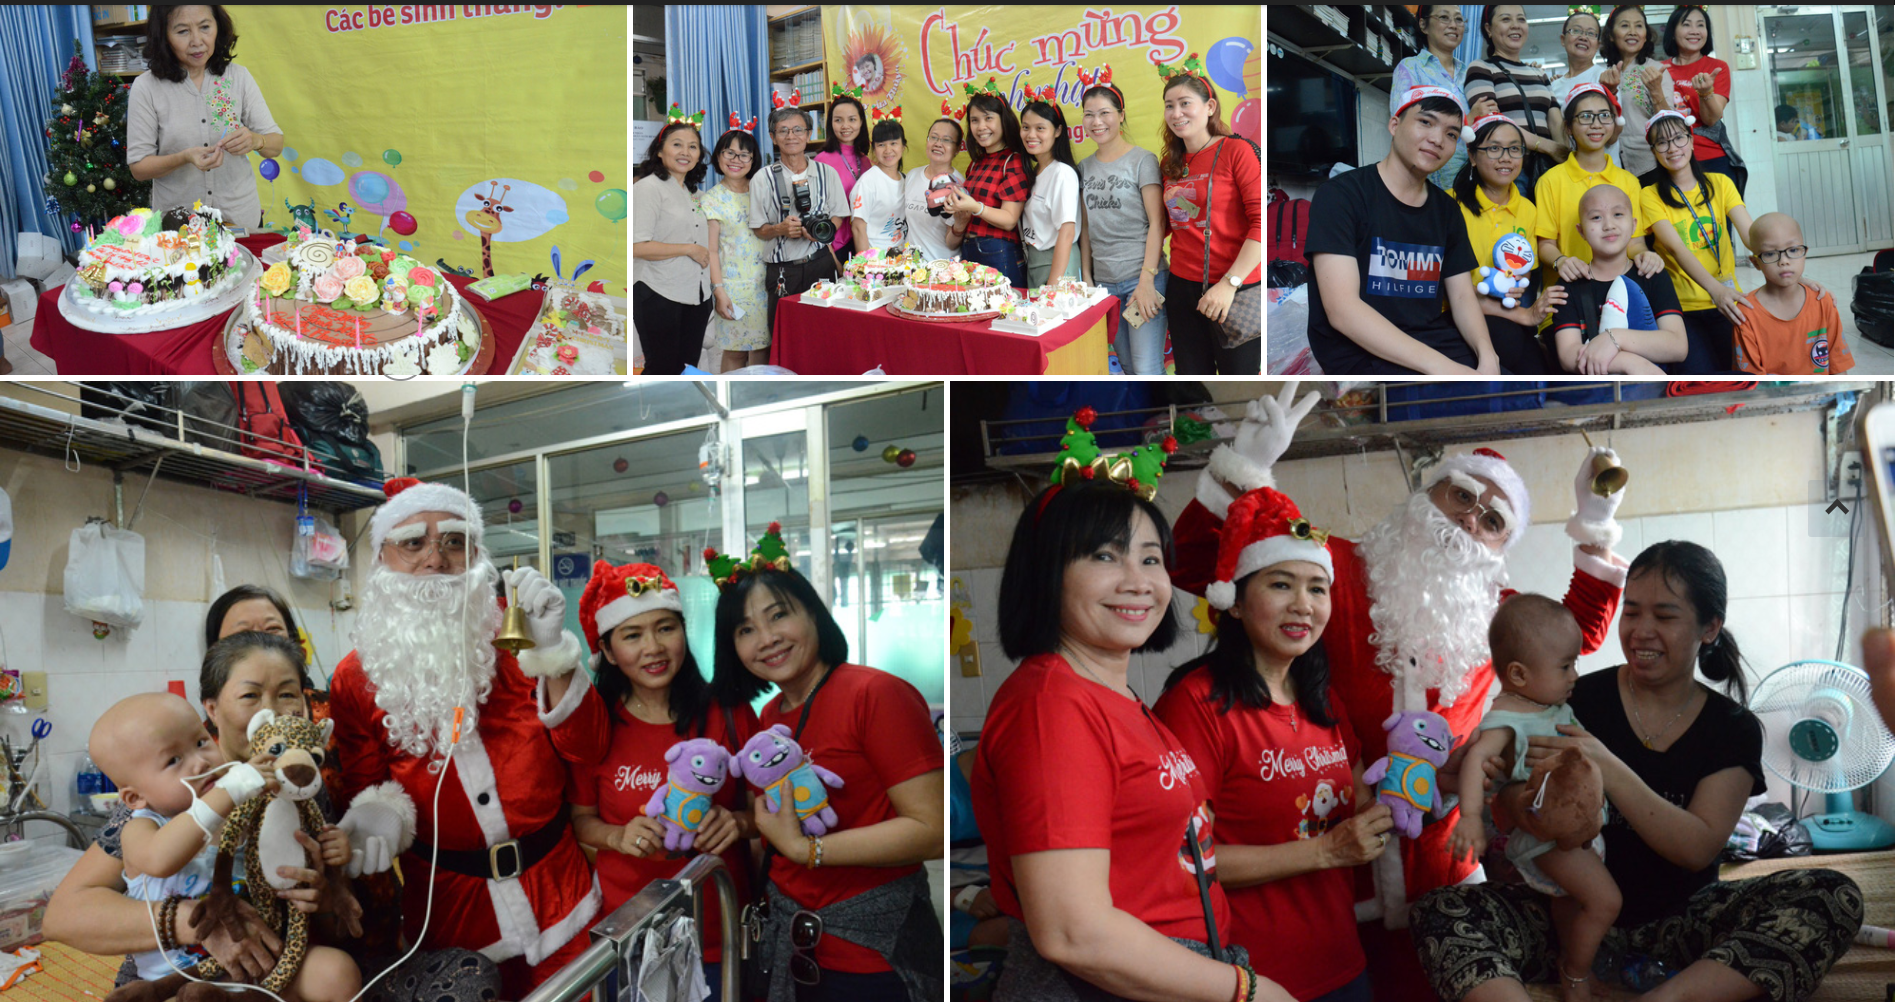 Volunteers dressed up as Santa Claus visit cancer children as part of Uoc mo cua Thuy campaign. Photo: Uyen Trinh / Tuoi Tre